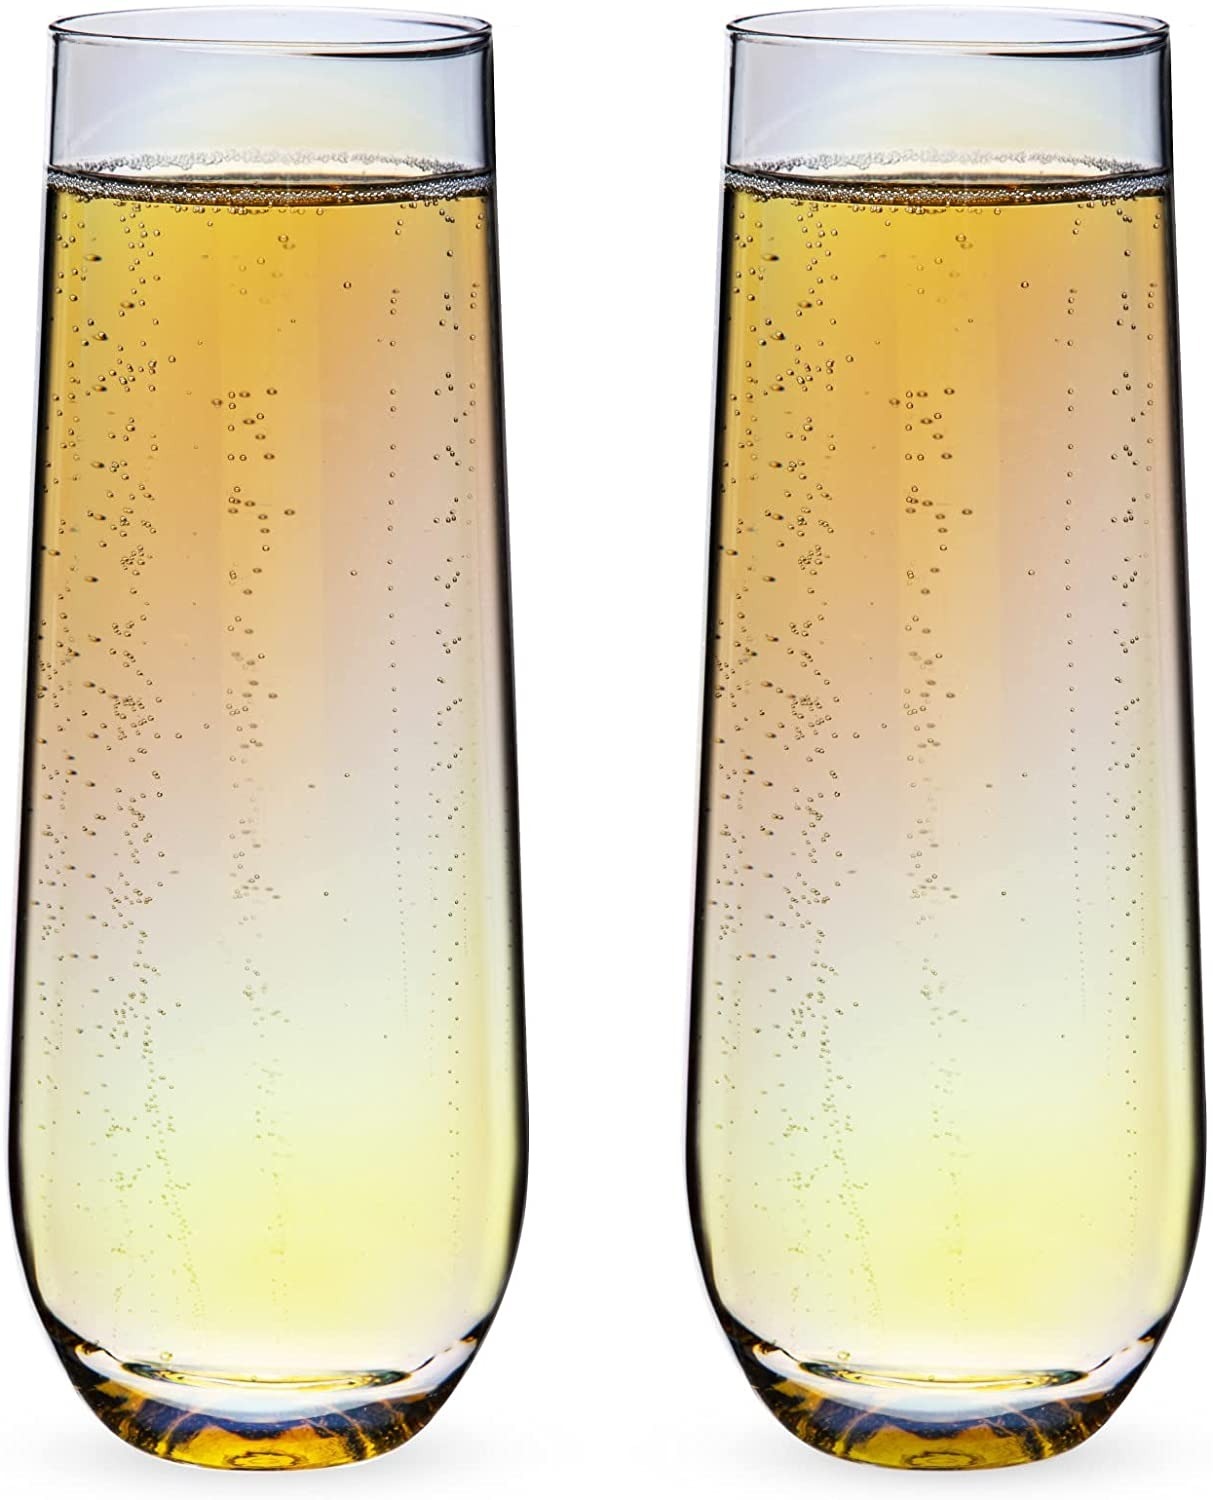 Luster Stemless Champagne Flute Set by Twine